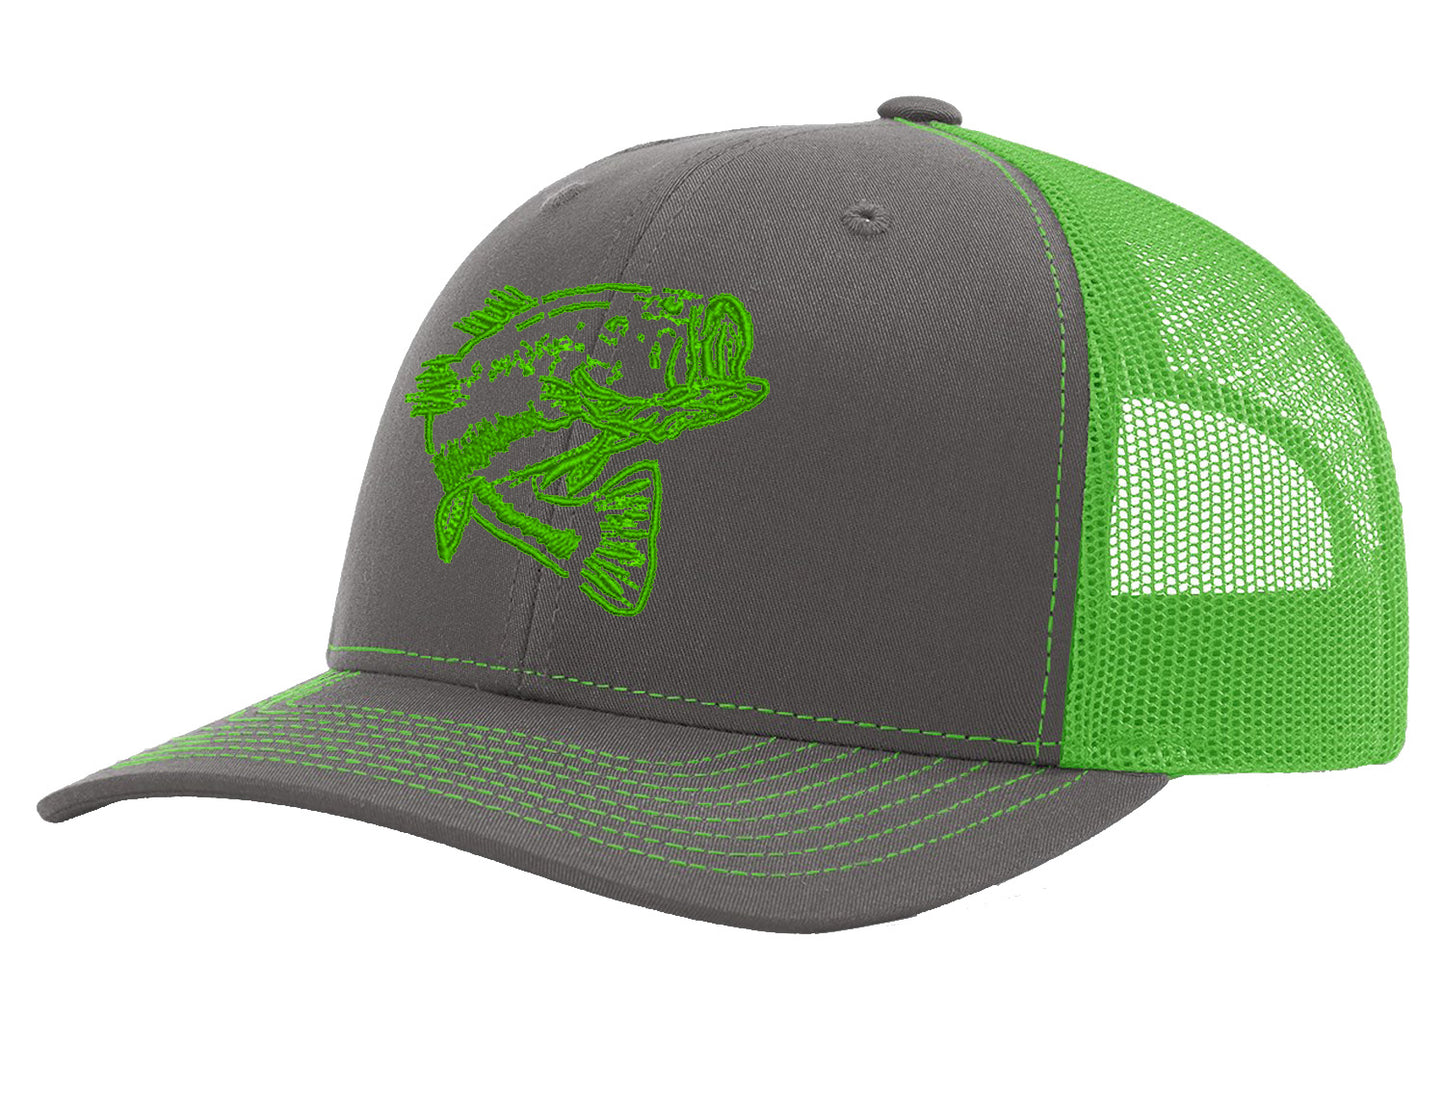 Bass Fishing "Reel Hawg" Structured Trucker Hats - *22 Colors!